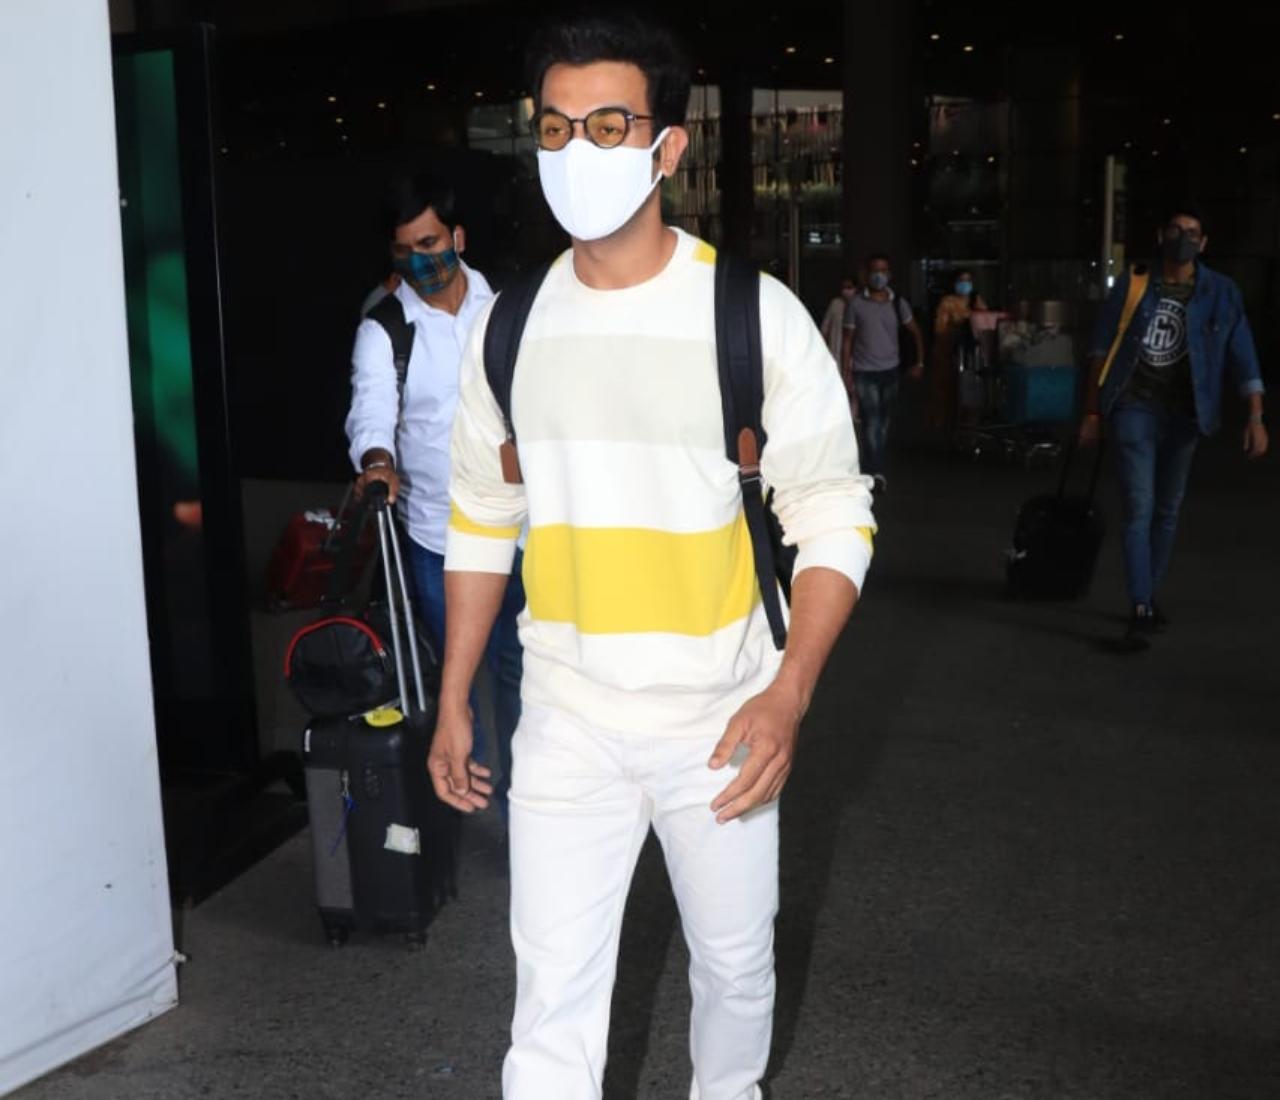 Rajkummar Rao was also seen at the airport. The actor is busy promoting his upcoming movie Roohi. The actor will be seen romancing with Janhvi Kapoor for the first time.